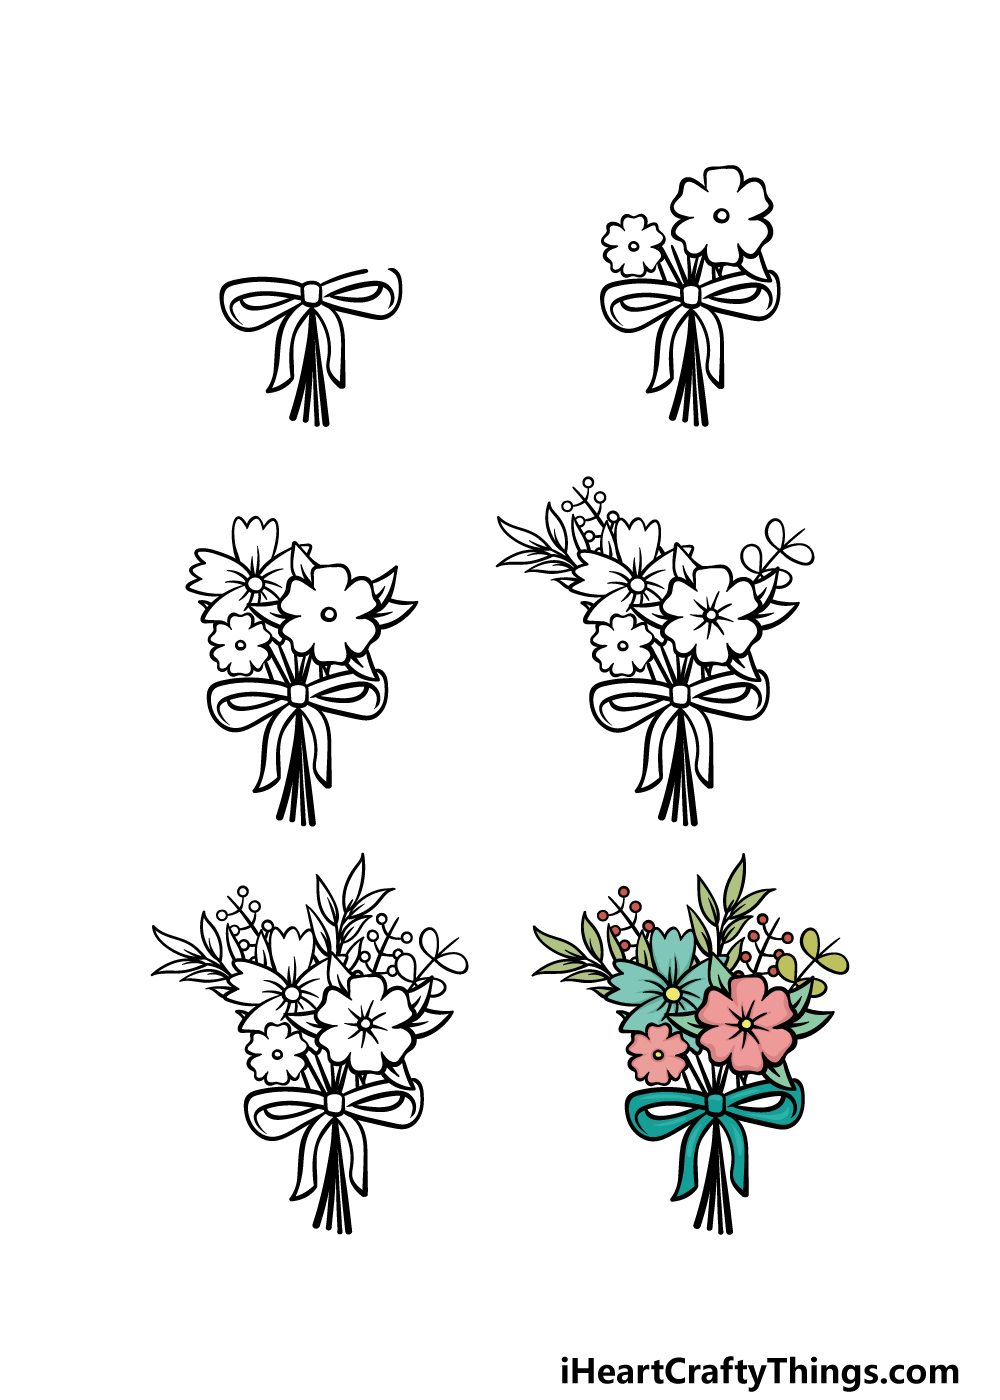 Cartoon Flowers Drawing - How To Draw Cartoon Flowers Step By Step